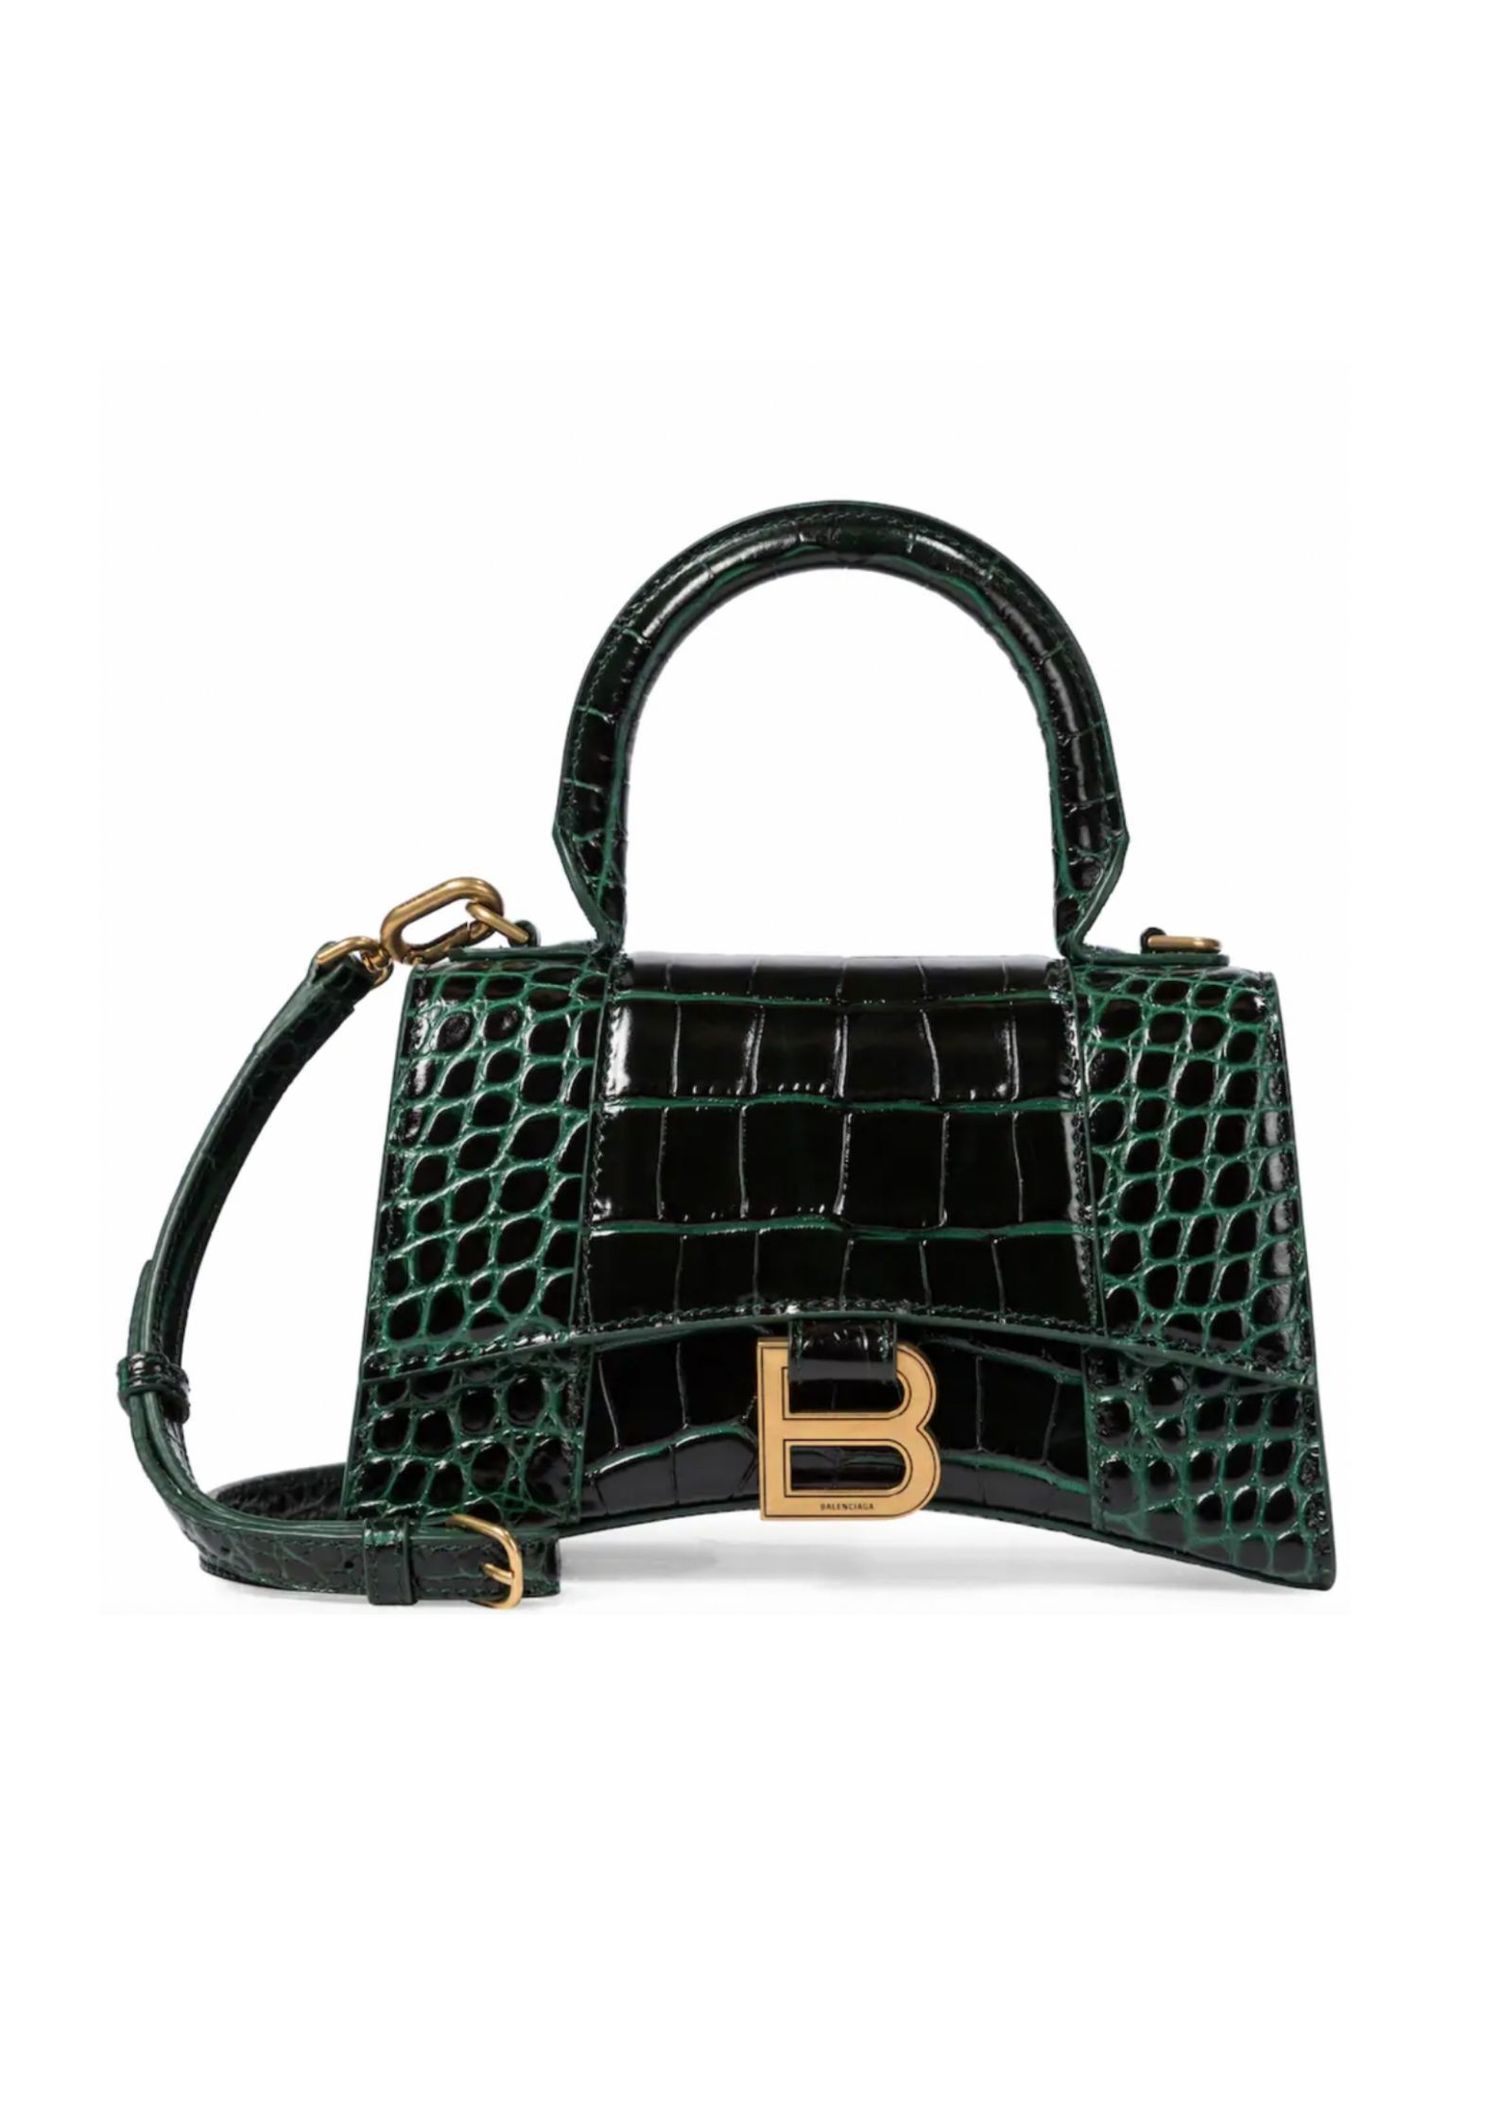 The Contemporary Appeal of the Balenciaga Hourglass Bag – LuxUness